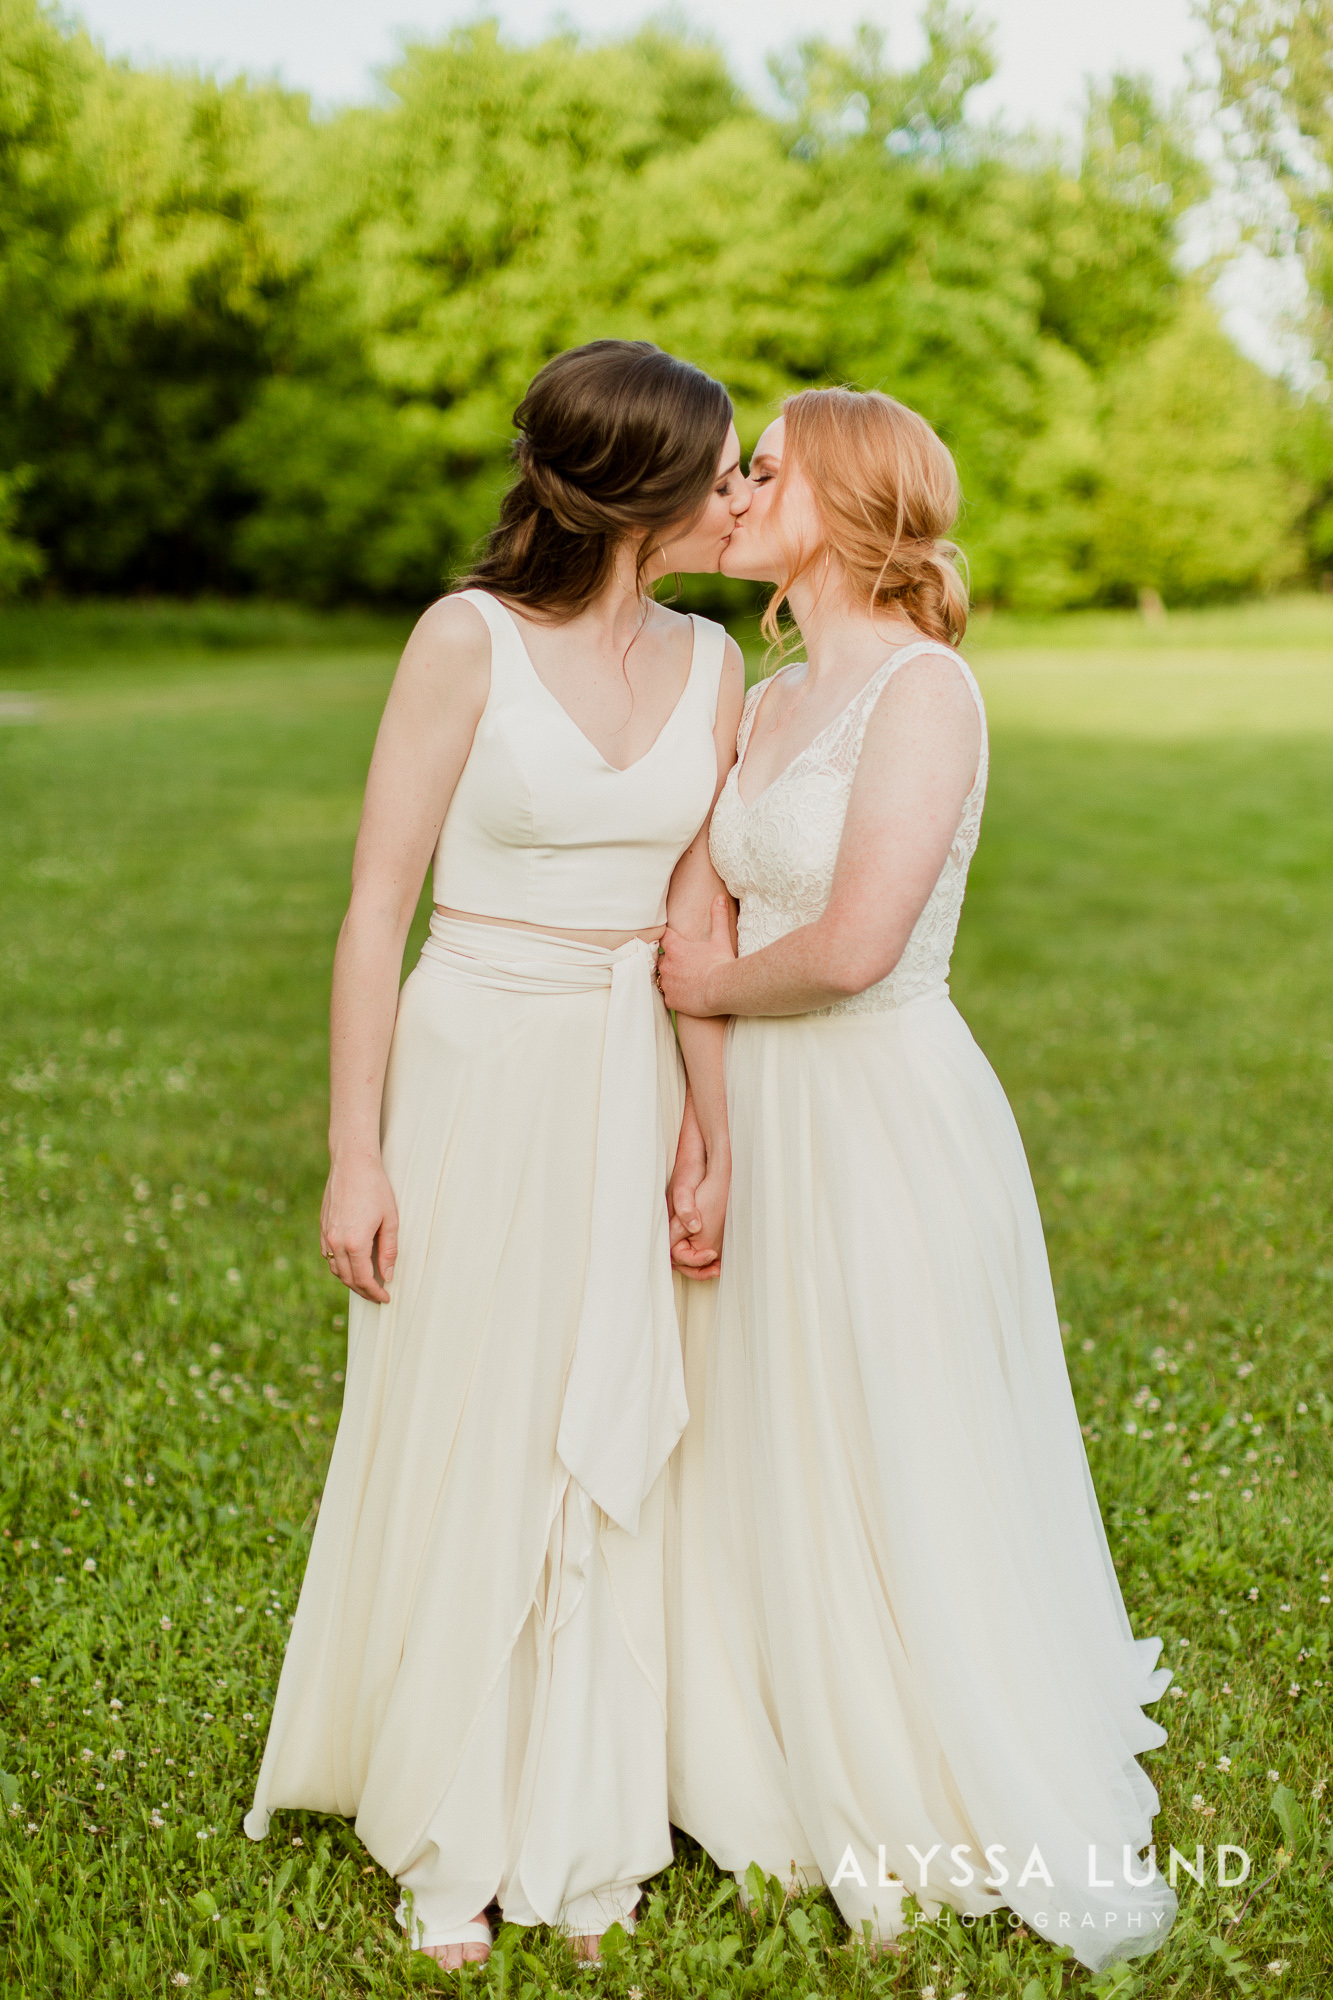 Queer wedding photography inspiration by Alyssa Lund Photography-38.jpg